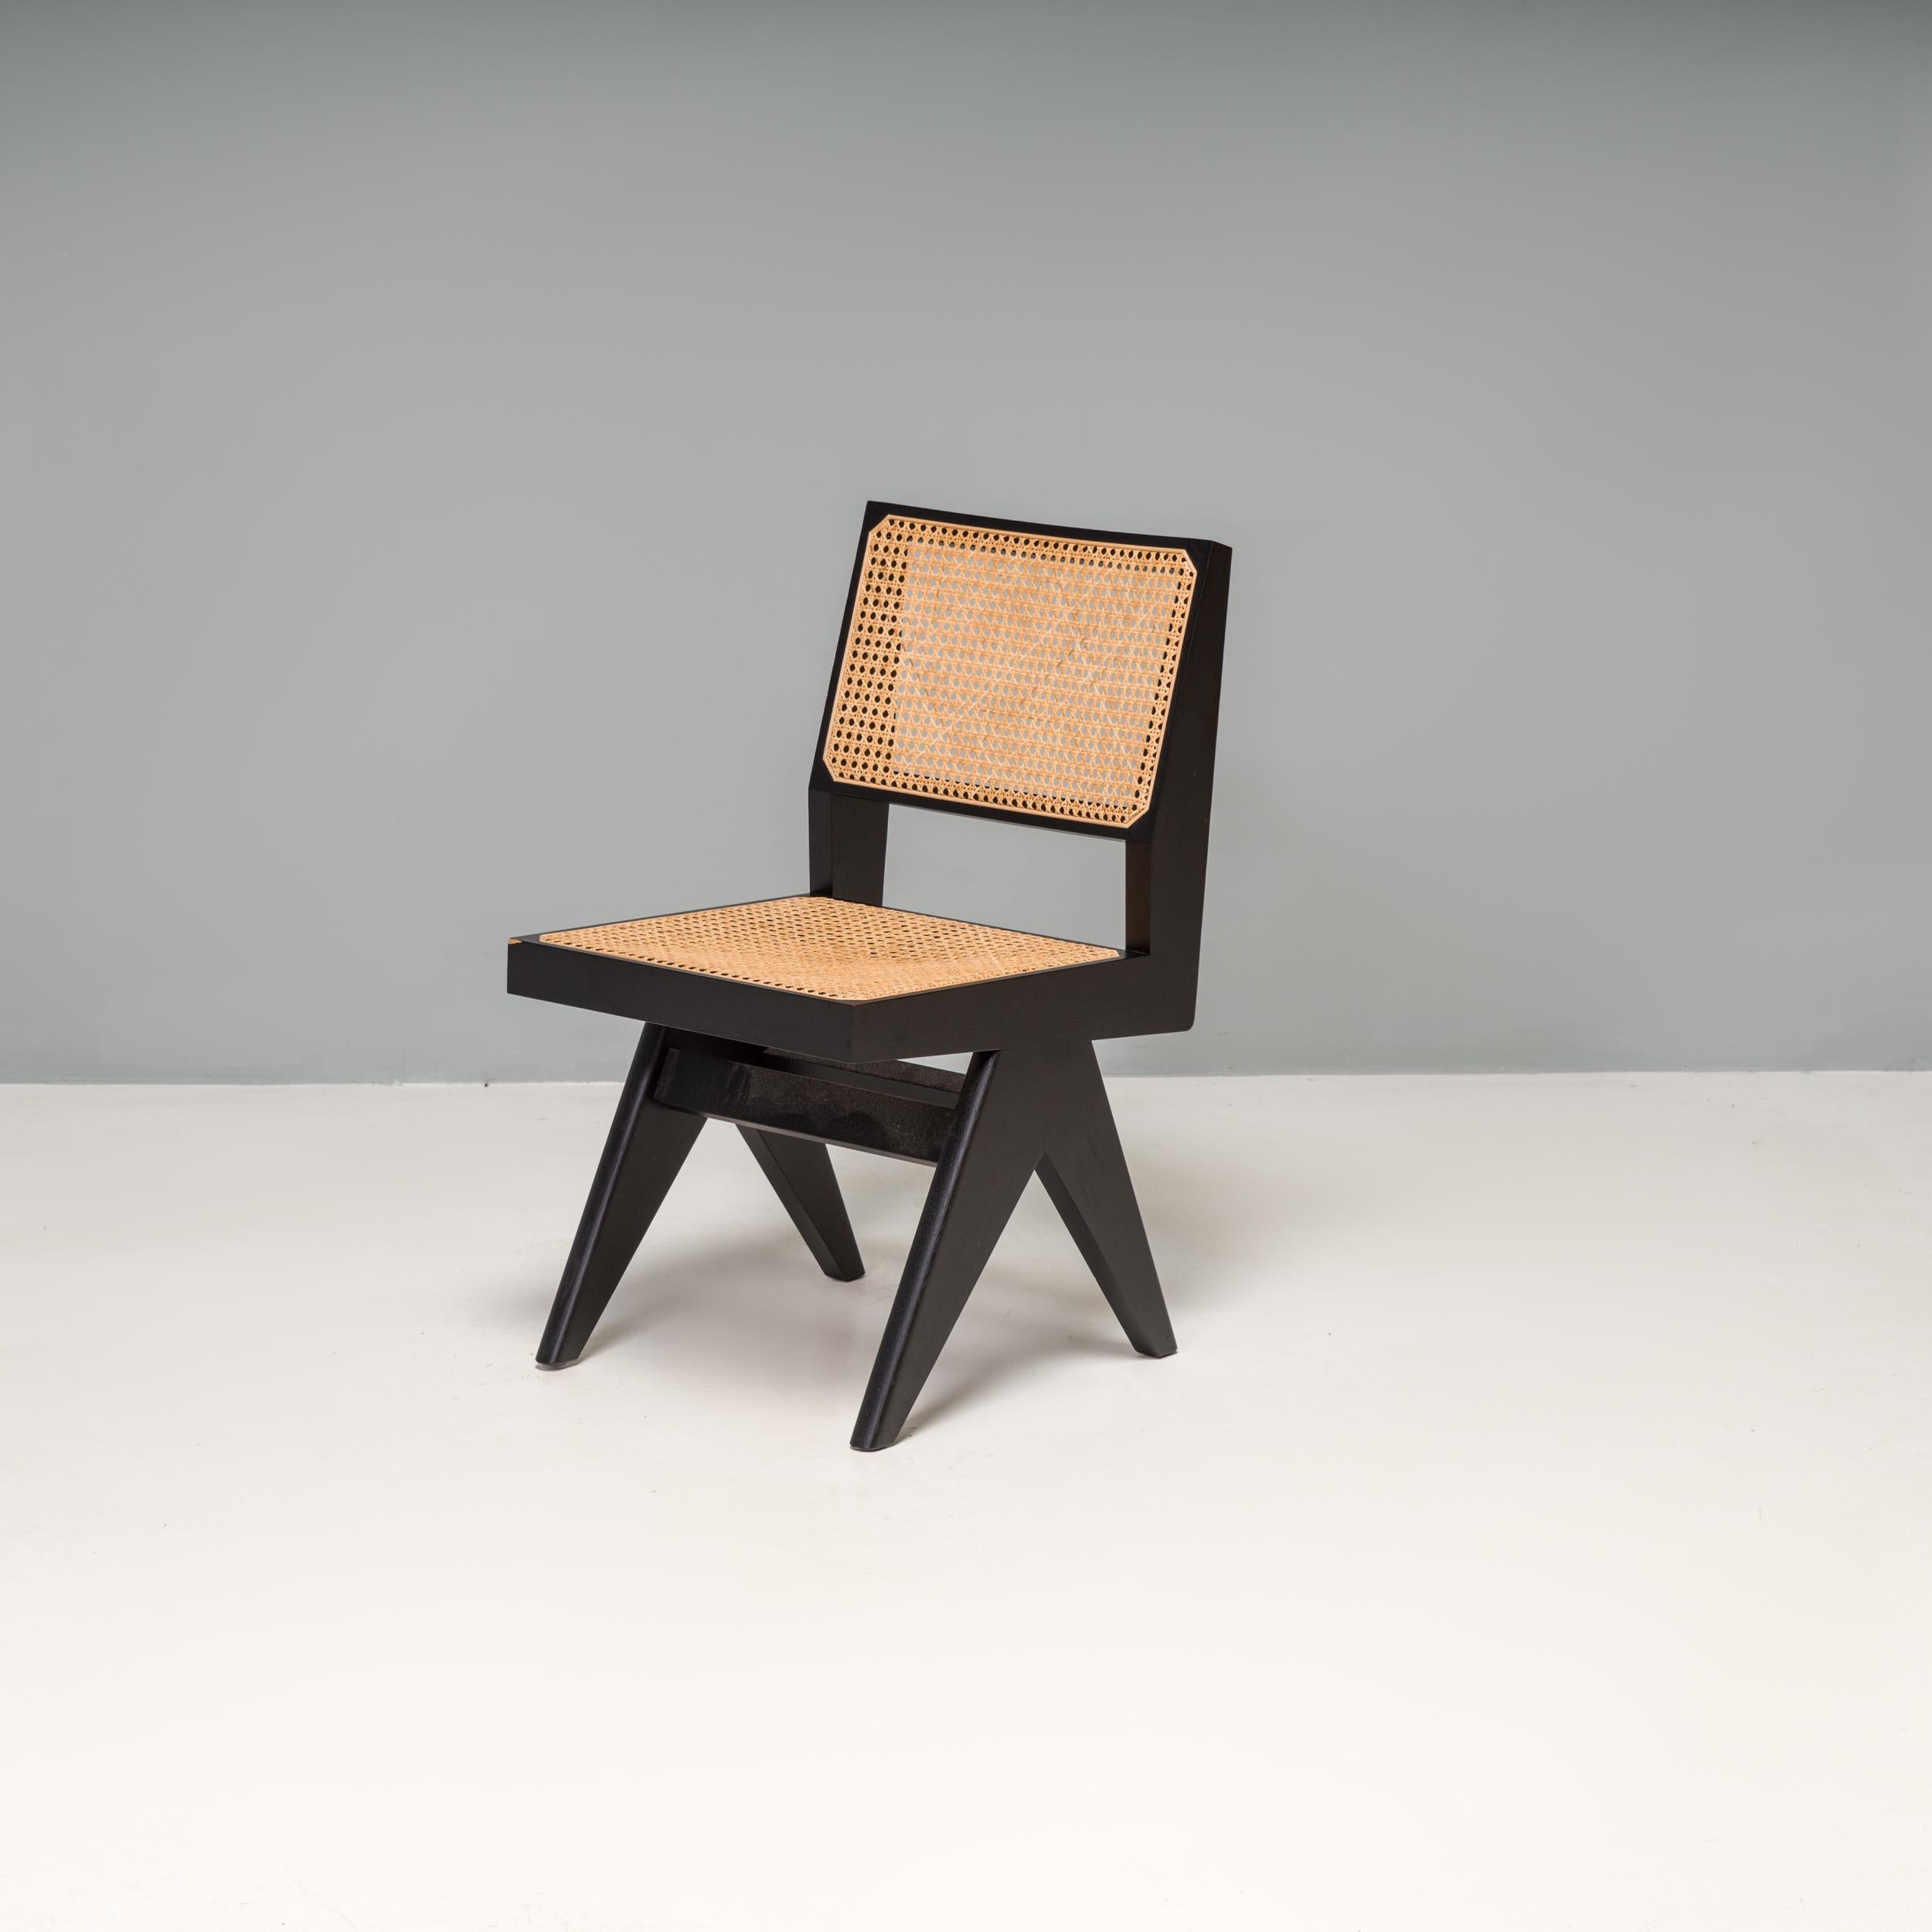 Reissued by Cassina in 2019 this version of the complex chair is part of the Hommage à Pierre Jeanneret collection. The chair was originally designed for Le Corbusier’s Capitol Complex building in Chandigarh.

Constructed from a solid oak frame